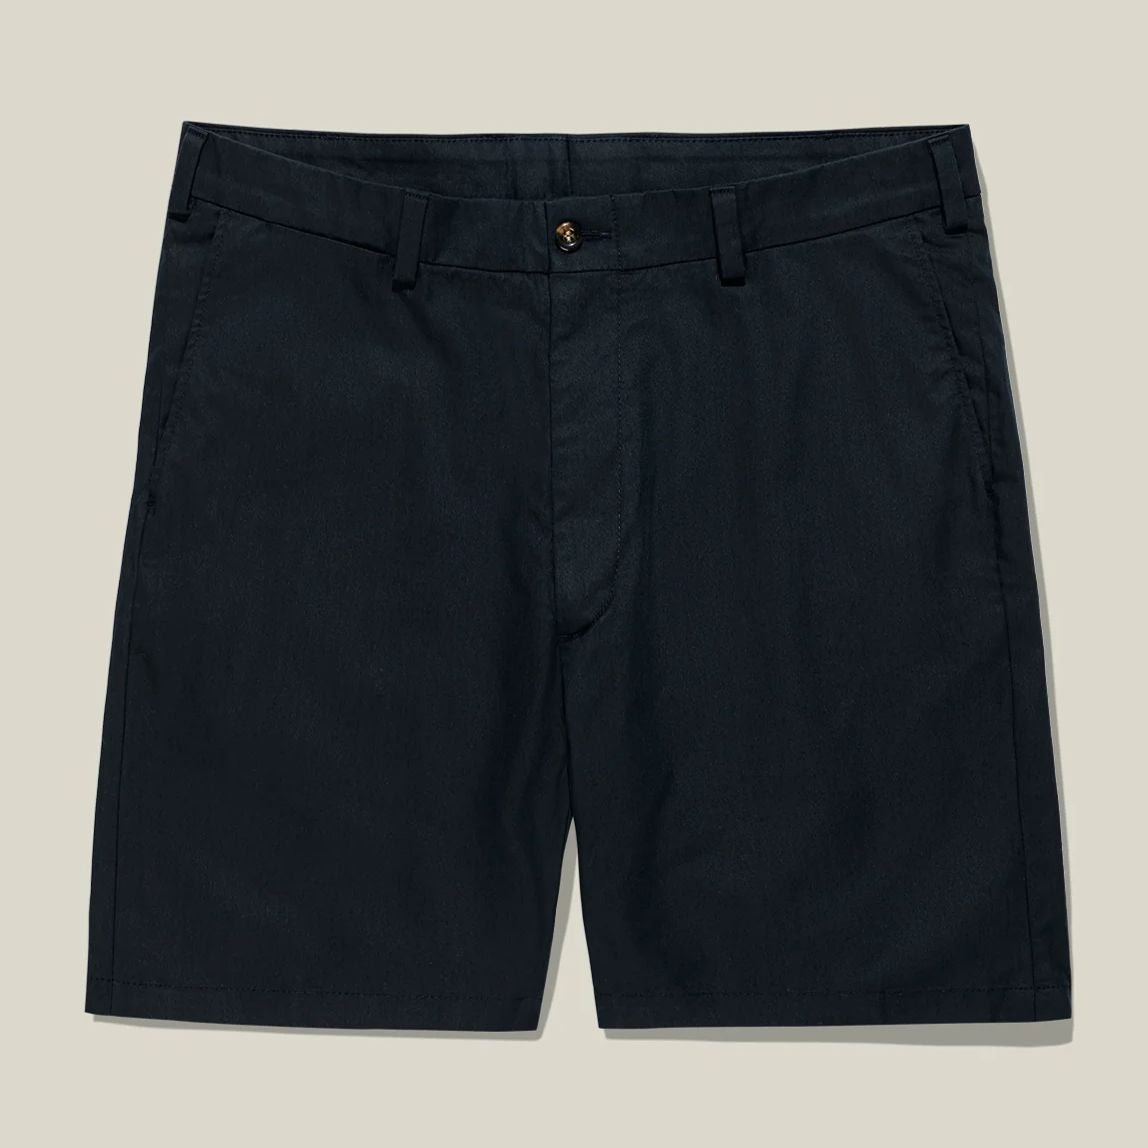 M3 Straight Fit Travel Twill Shorts in Navy by Bills Khakis